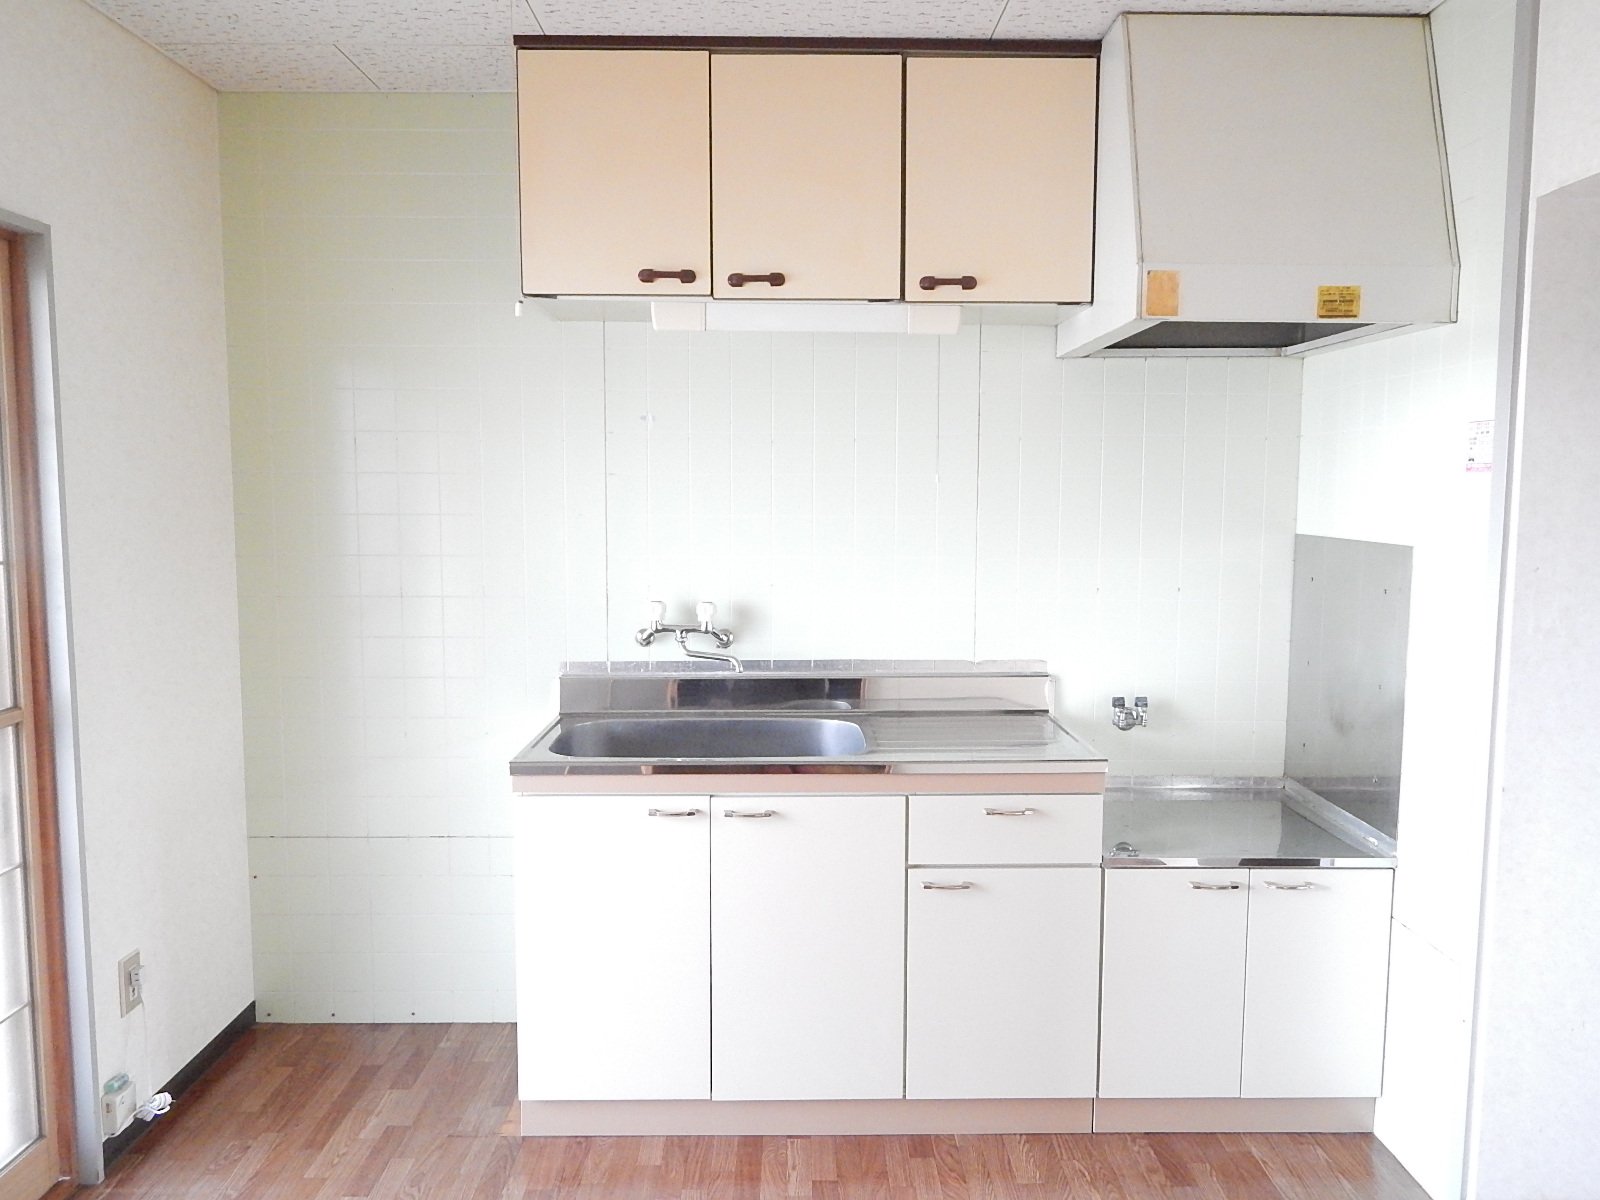 Kitchen. You will want to have a gas stove installed Allowed cuisine